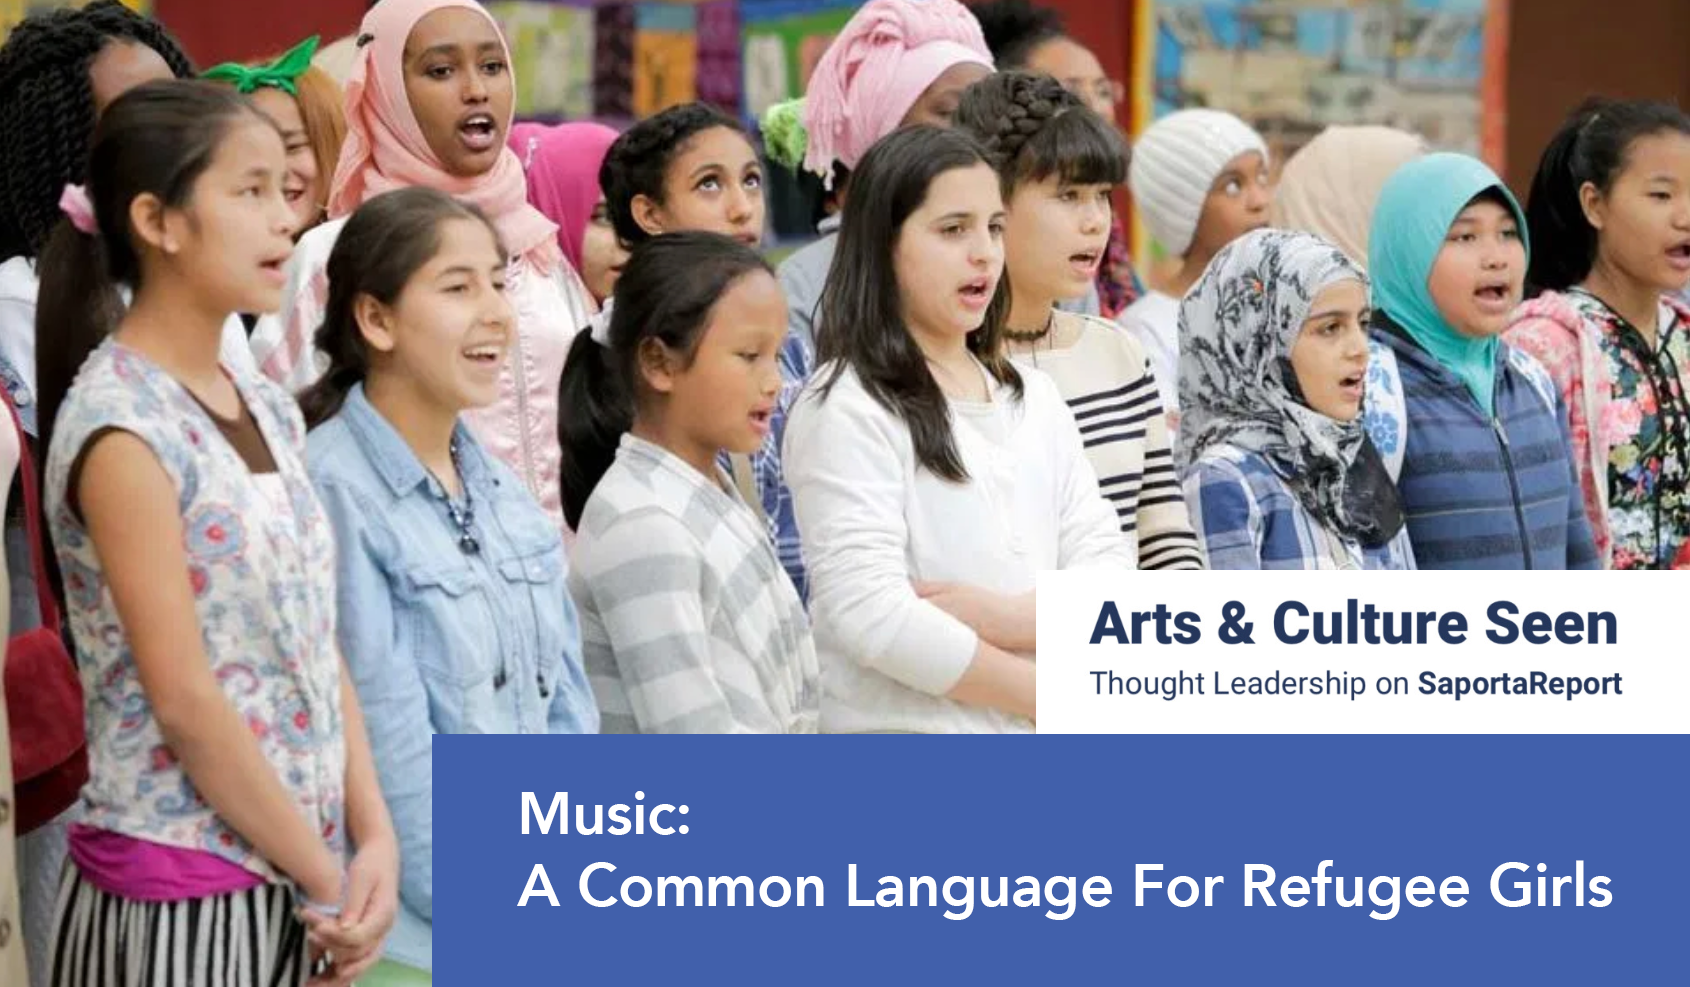 Arts & Culture Seen: Music: A Common Language For Refugee Girls